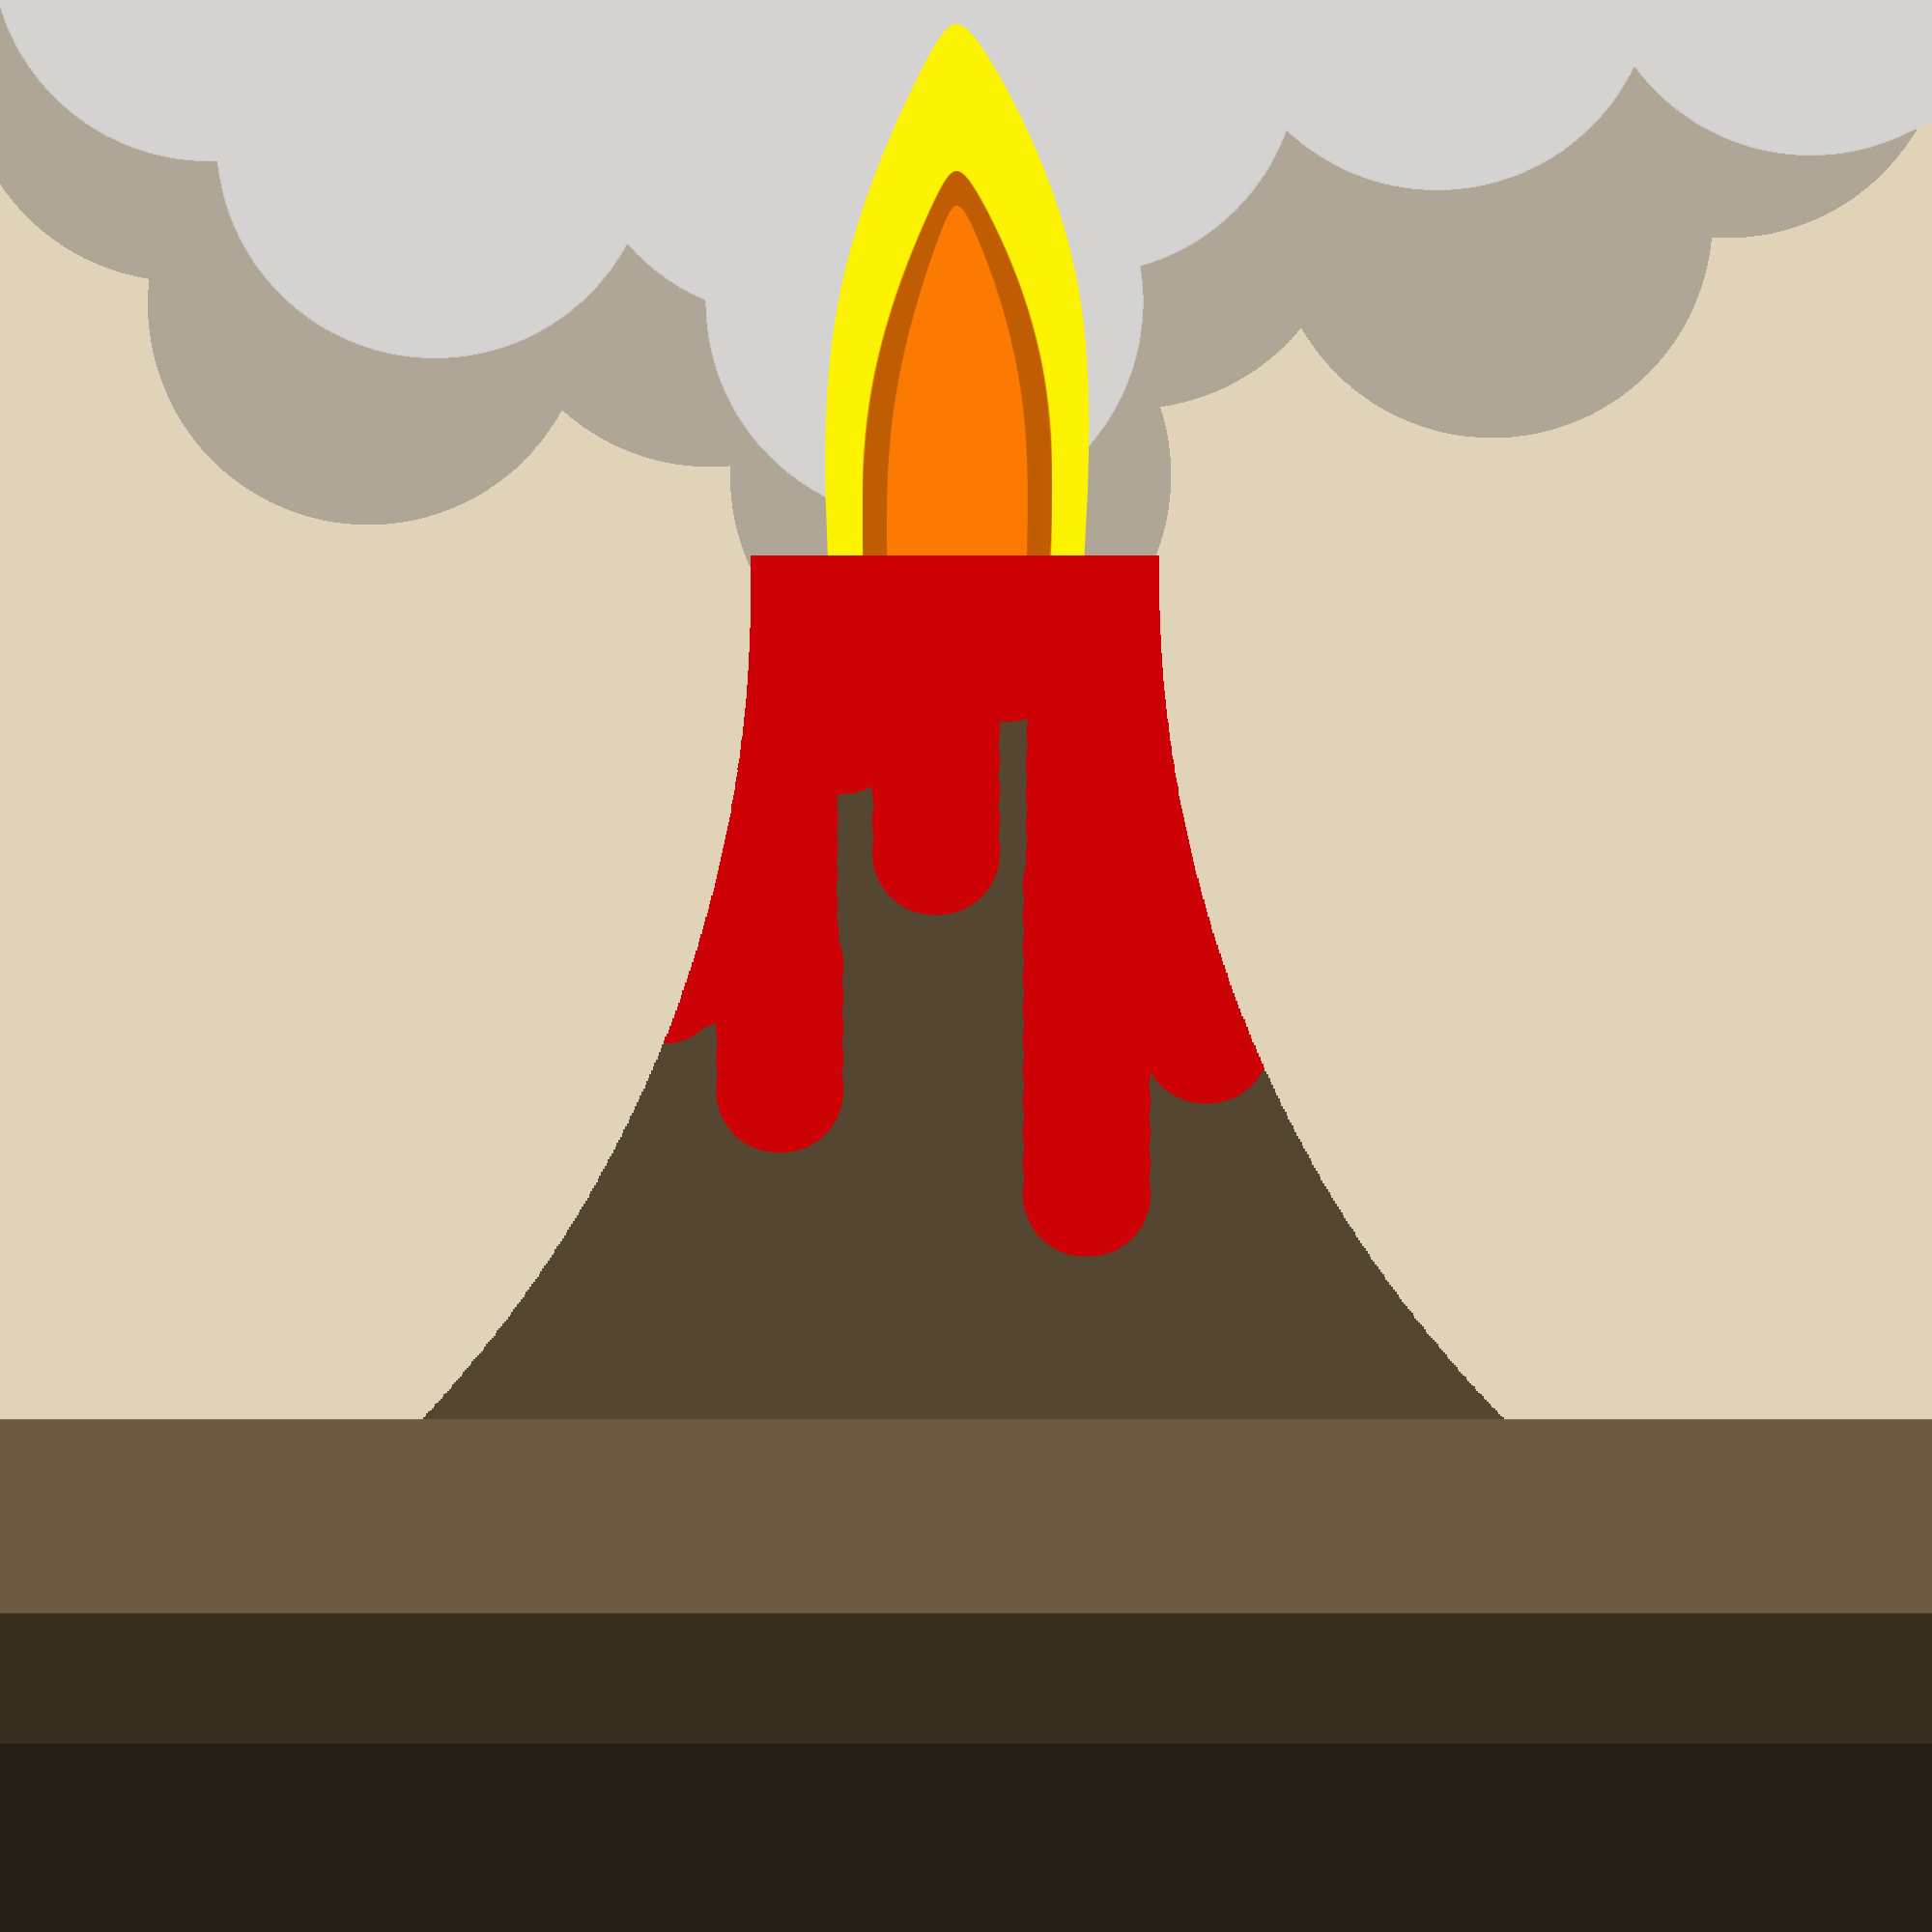 Stylised image of an erupting volcano